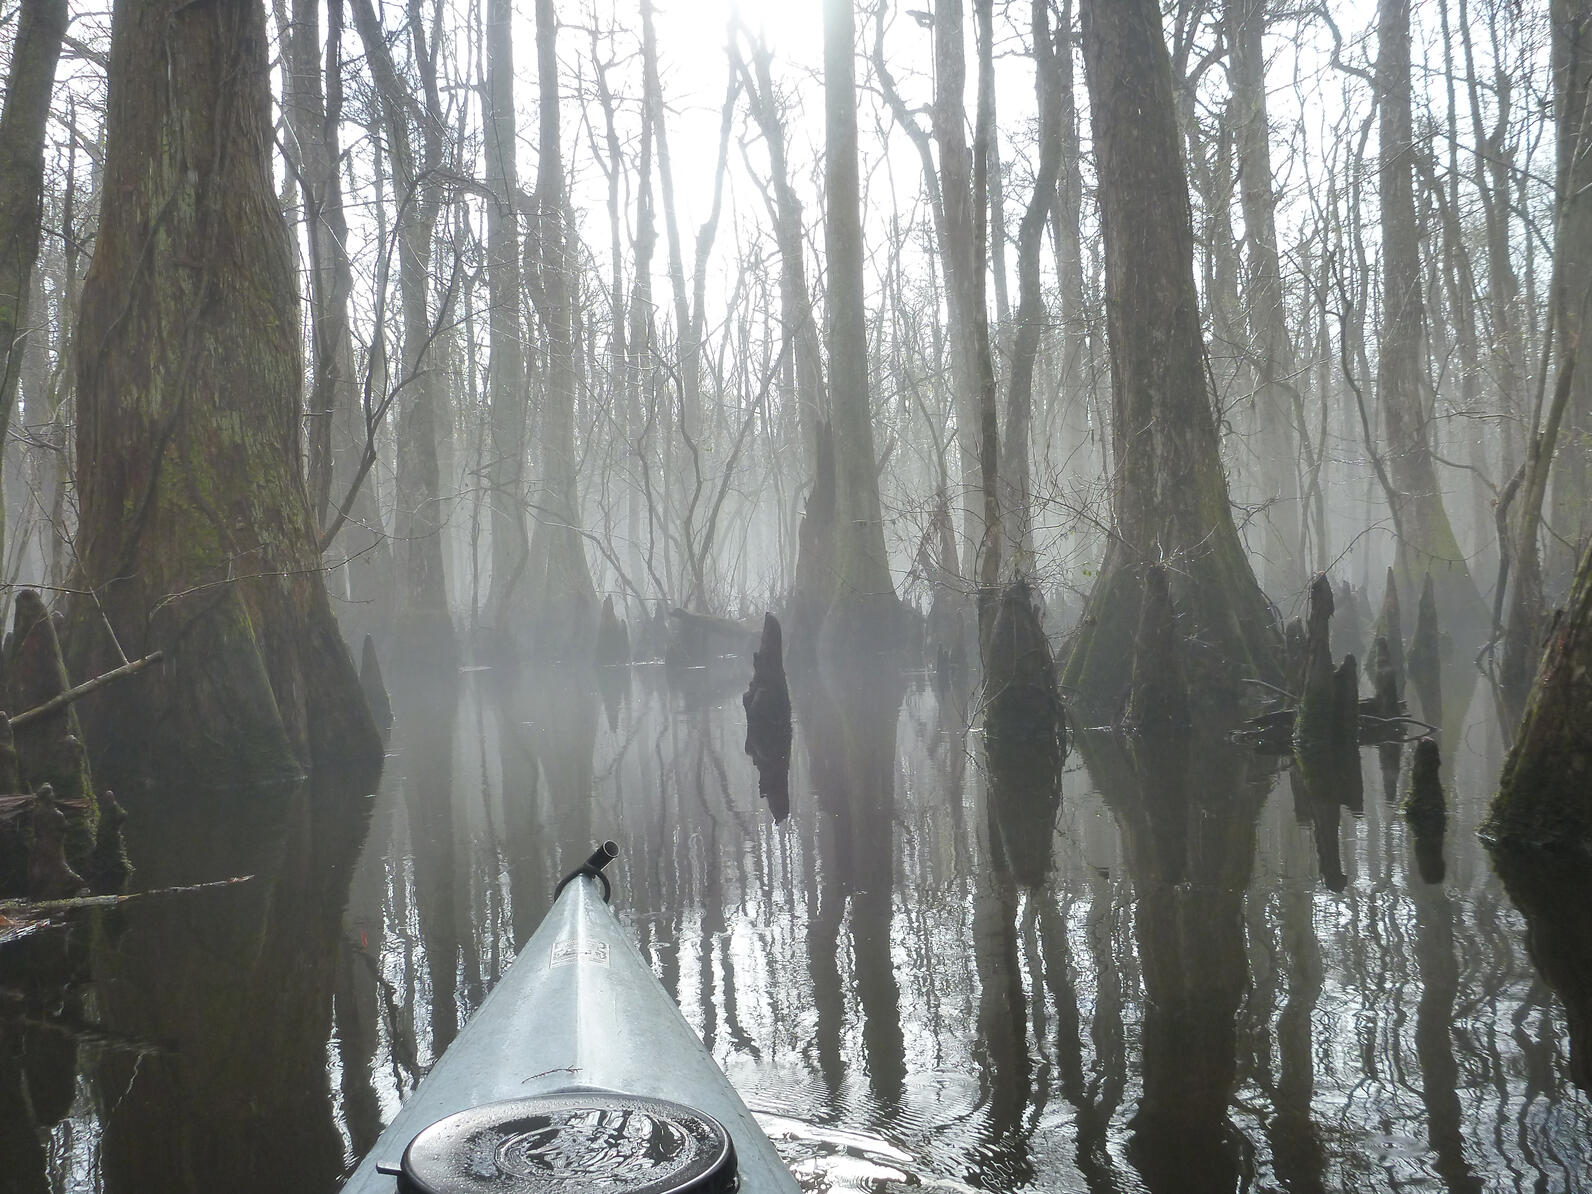 This view is from within a kayak, the front of the plastic boat pointing downstream. Its winter so the leaves are down, all of the trees rising spindle-like up into the sky. Just above the water a low fog works to obscure the distance. Mysterious.